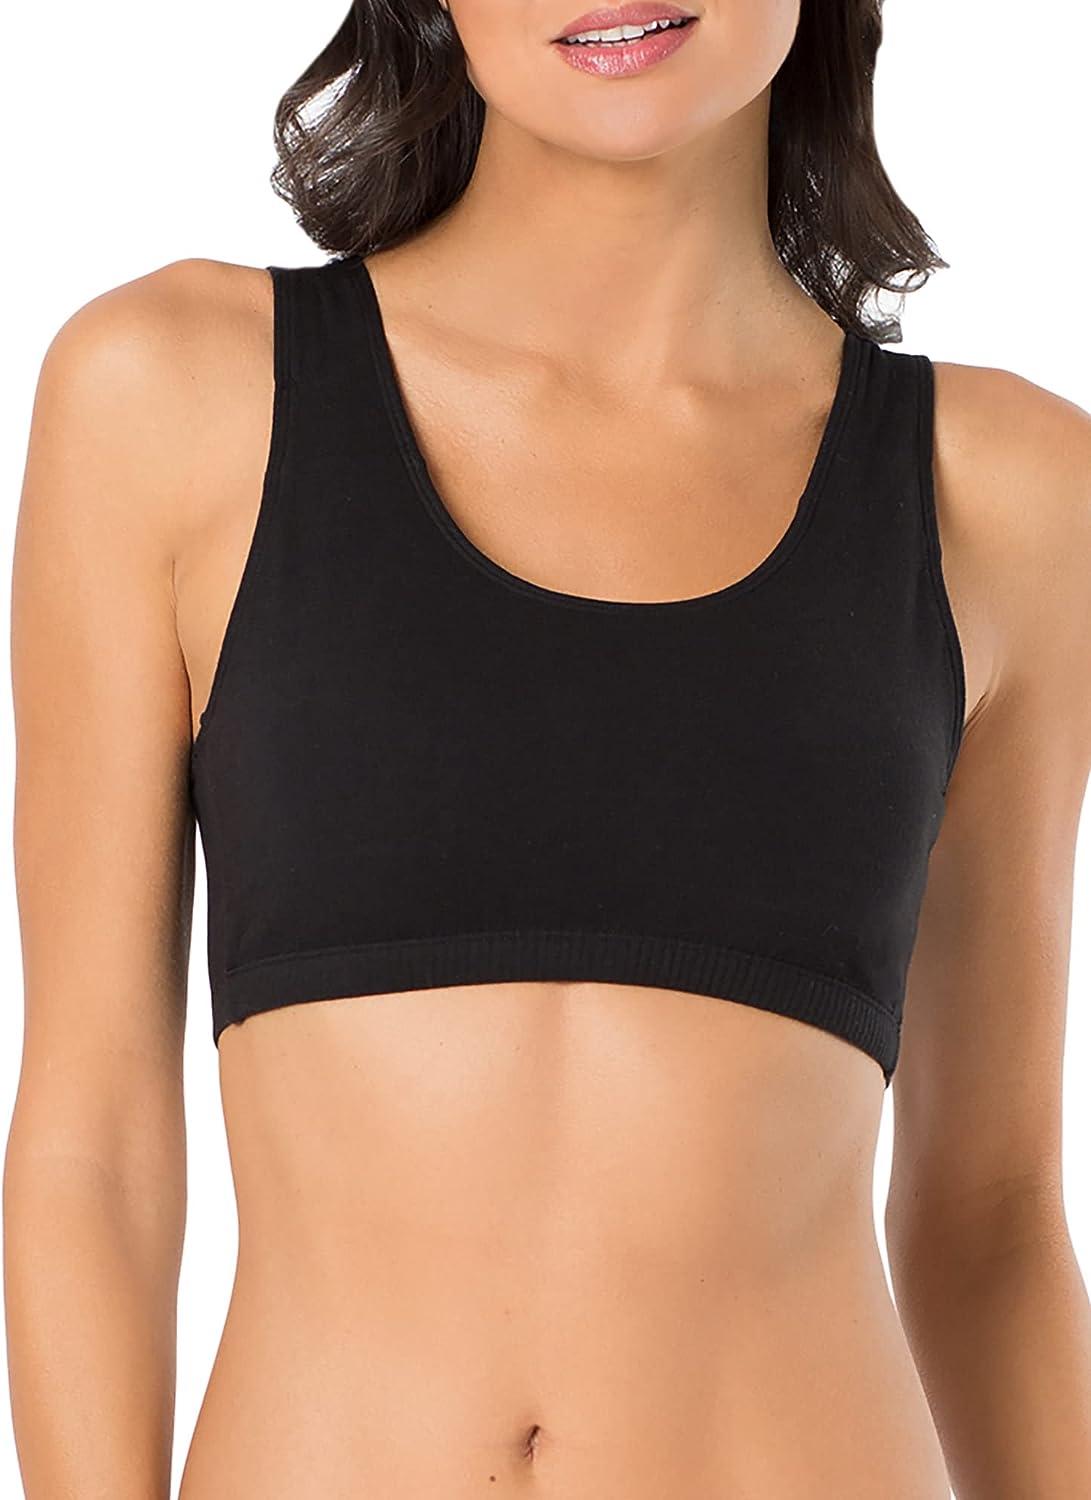 Fruit of the Loom Women's Built Up Tank Style Sports Bra Value Pack Black/ White/White/Heather Grey 4-pack 42